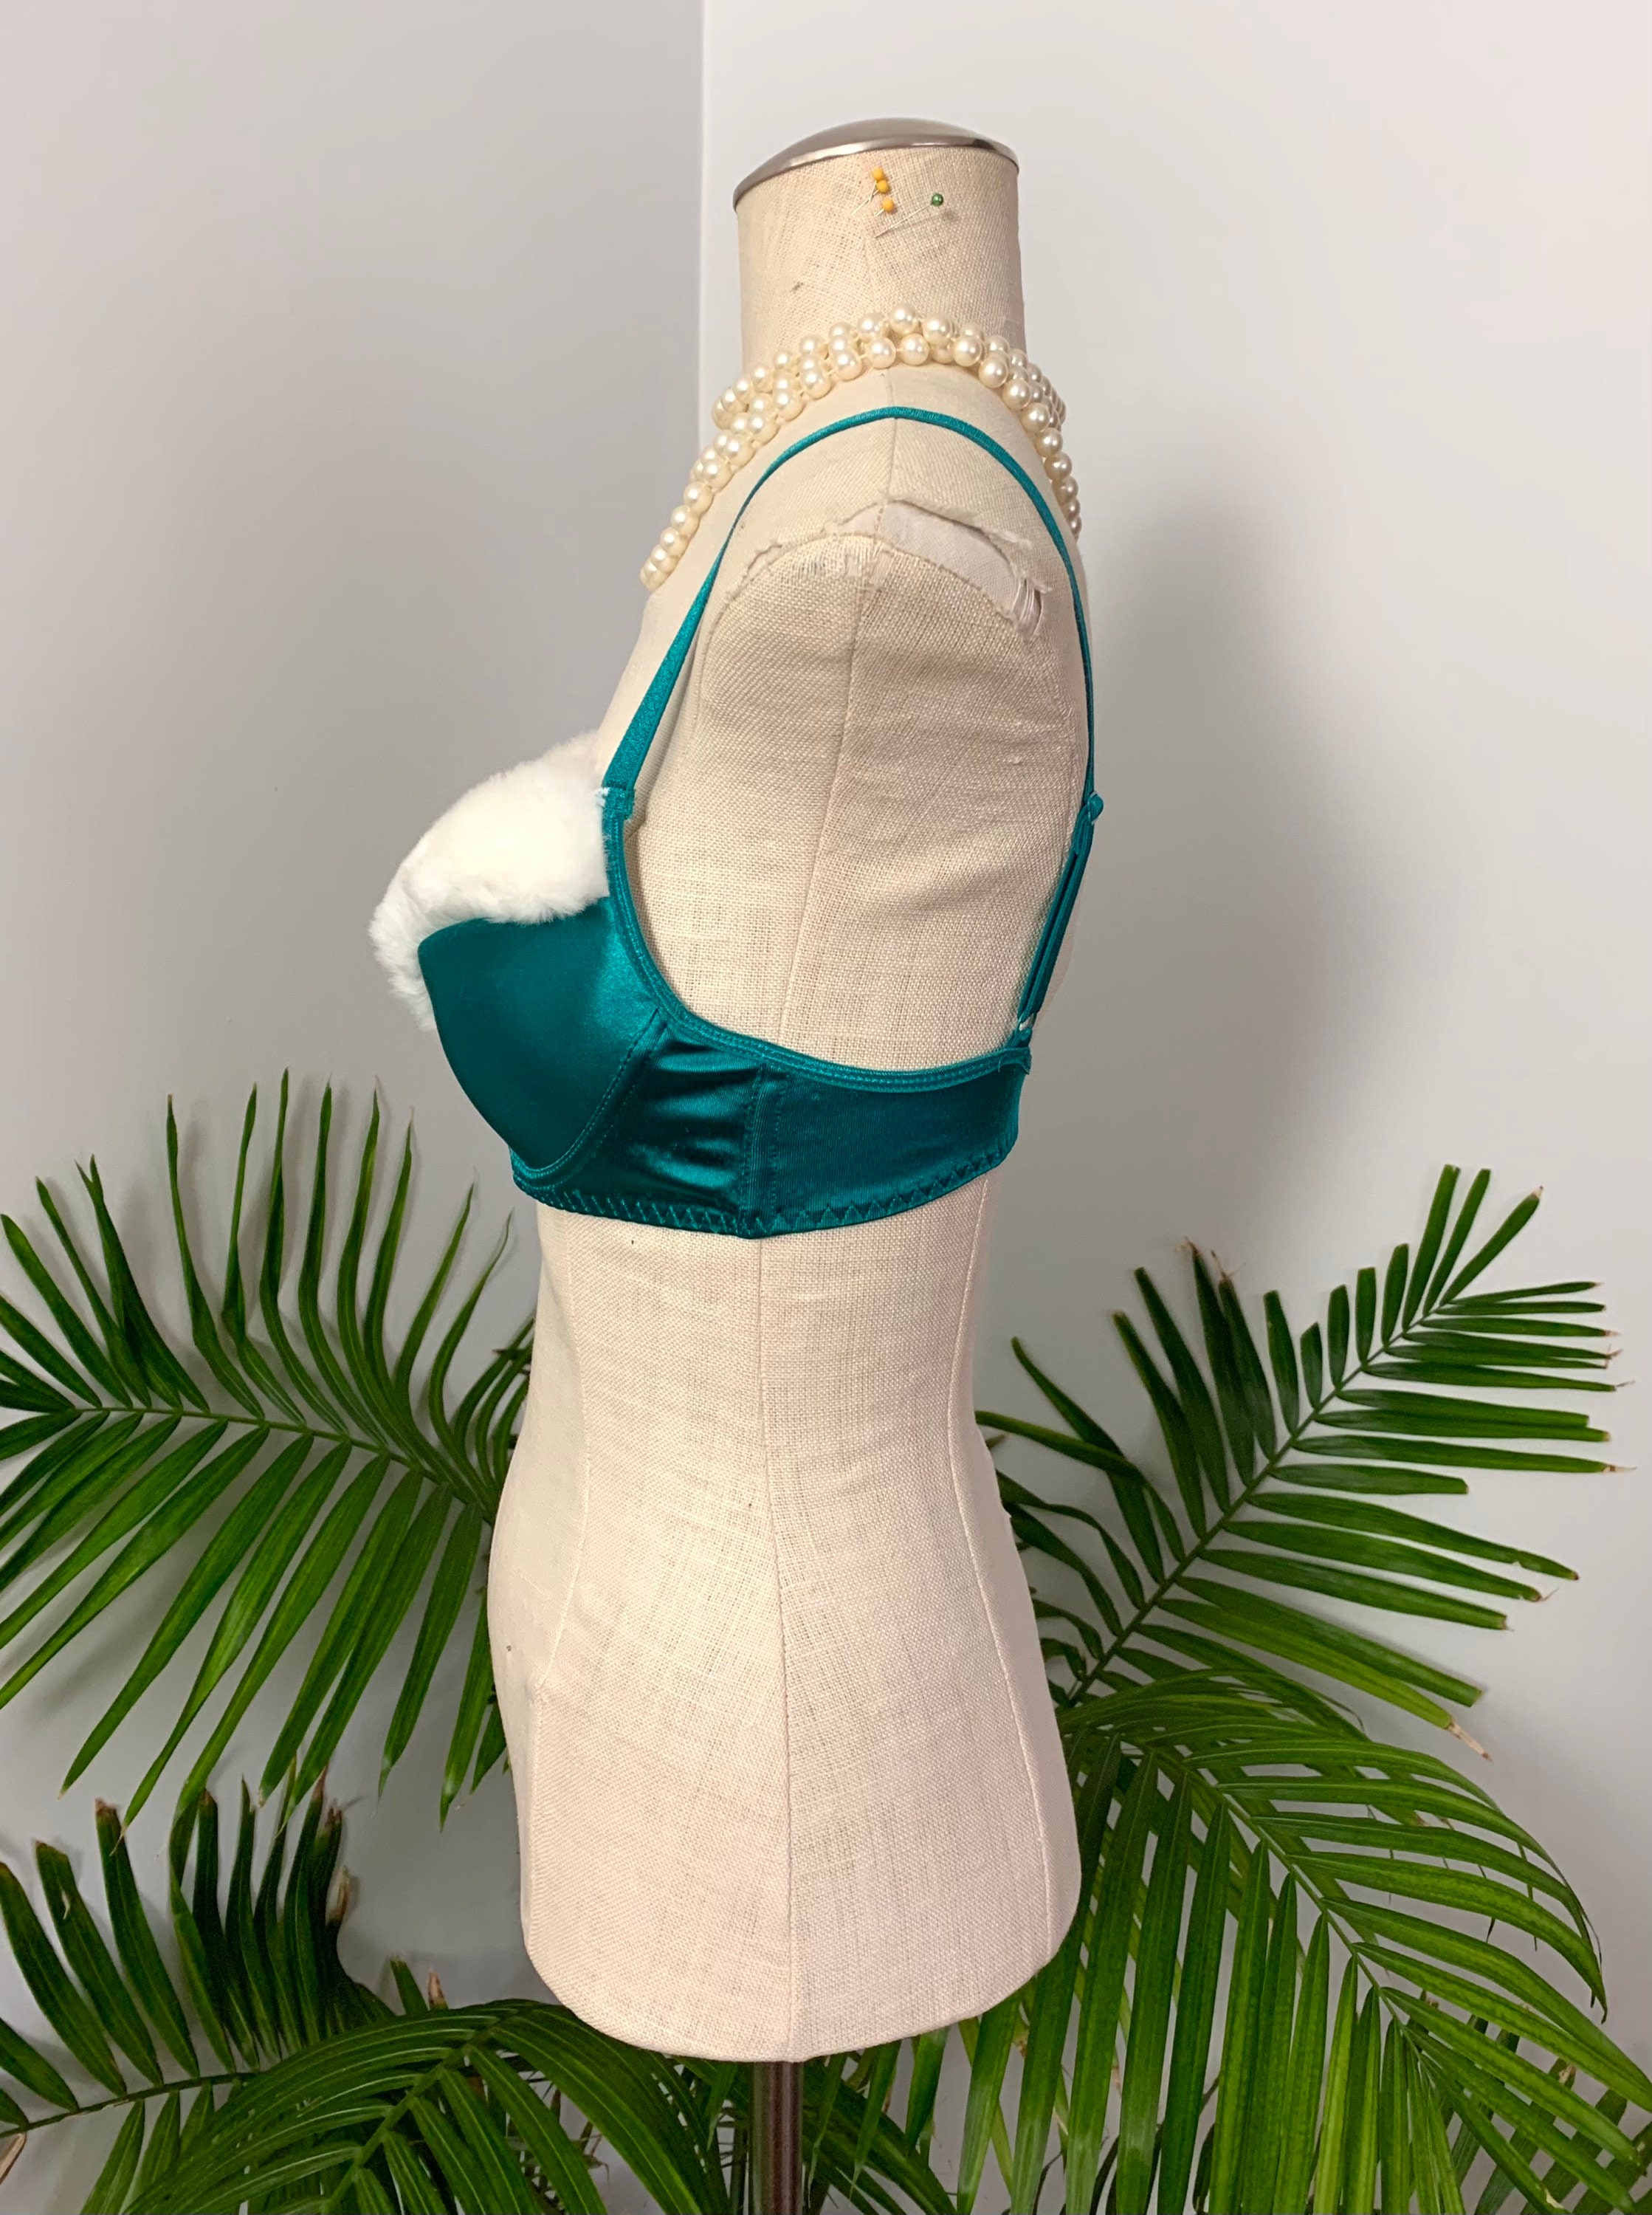 VINTAGE HOLIDAY BRA Teal Green Satin Bra With Faux Fur Trim, Xmas Winter  Lingerie, Retro Chic Pinup Style Brassiere 1990s 